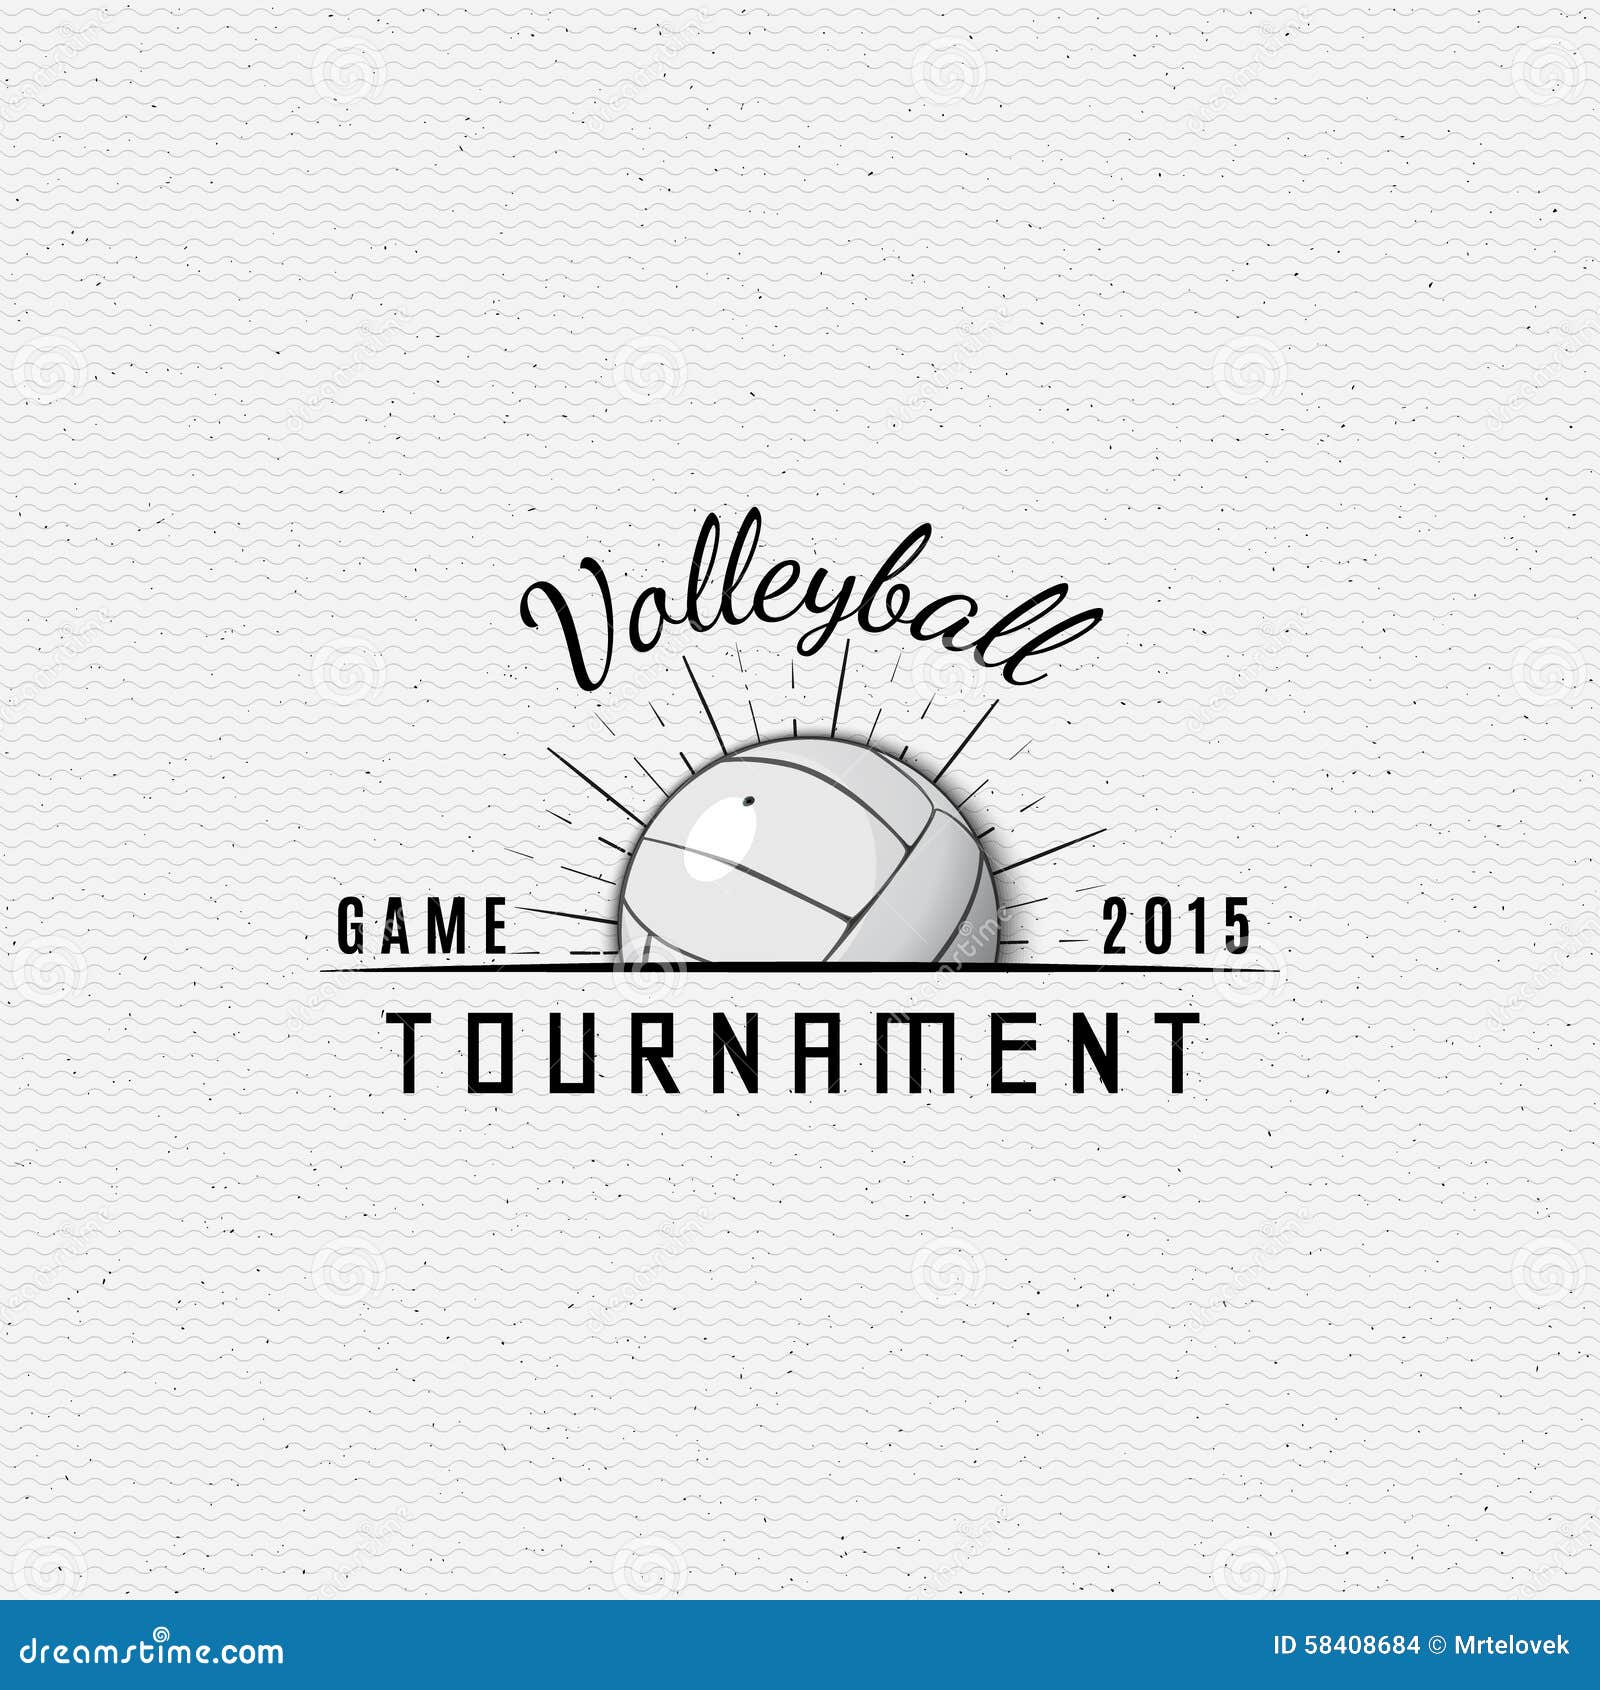 Volleyball Badges Logos and Labels for Any Use Stock Vector ...